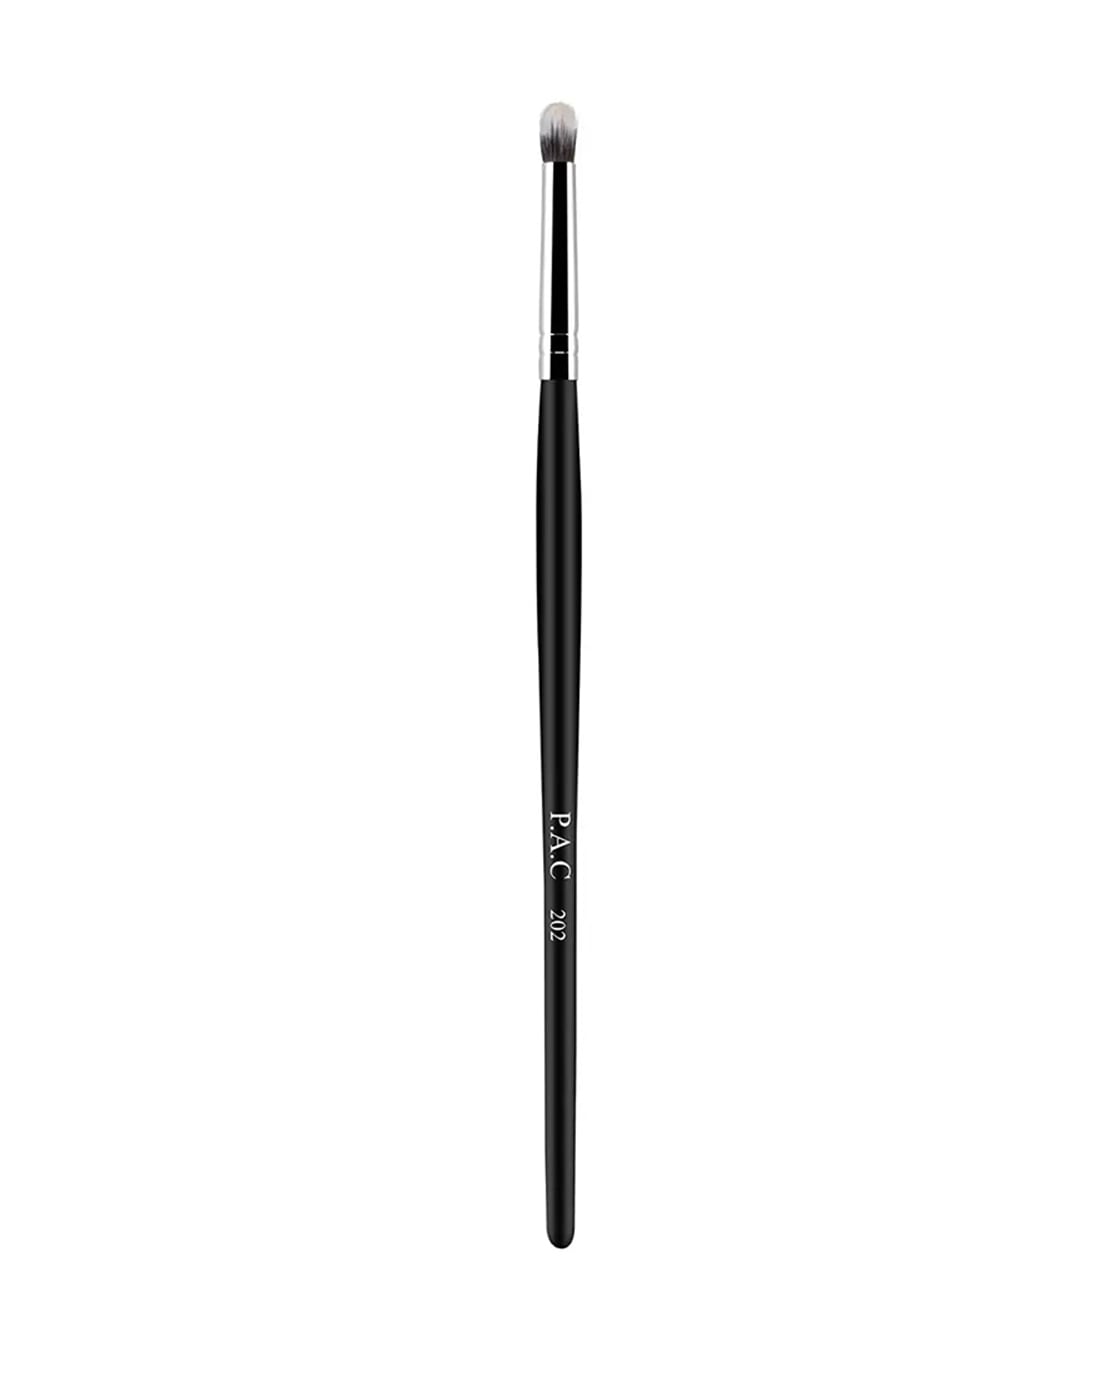 THE TOOL LAB 227 Taper Creeze Eye shadow Makeup Brush - Angled Precision  Define shading Eyeliner Blending for a Eye Makeup Professional - Premium